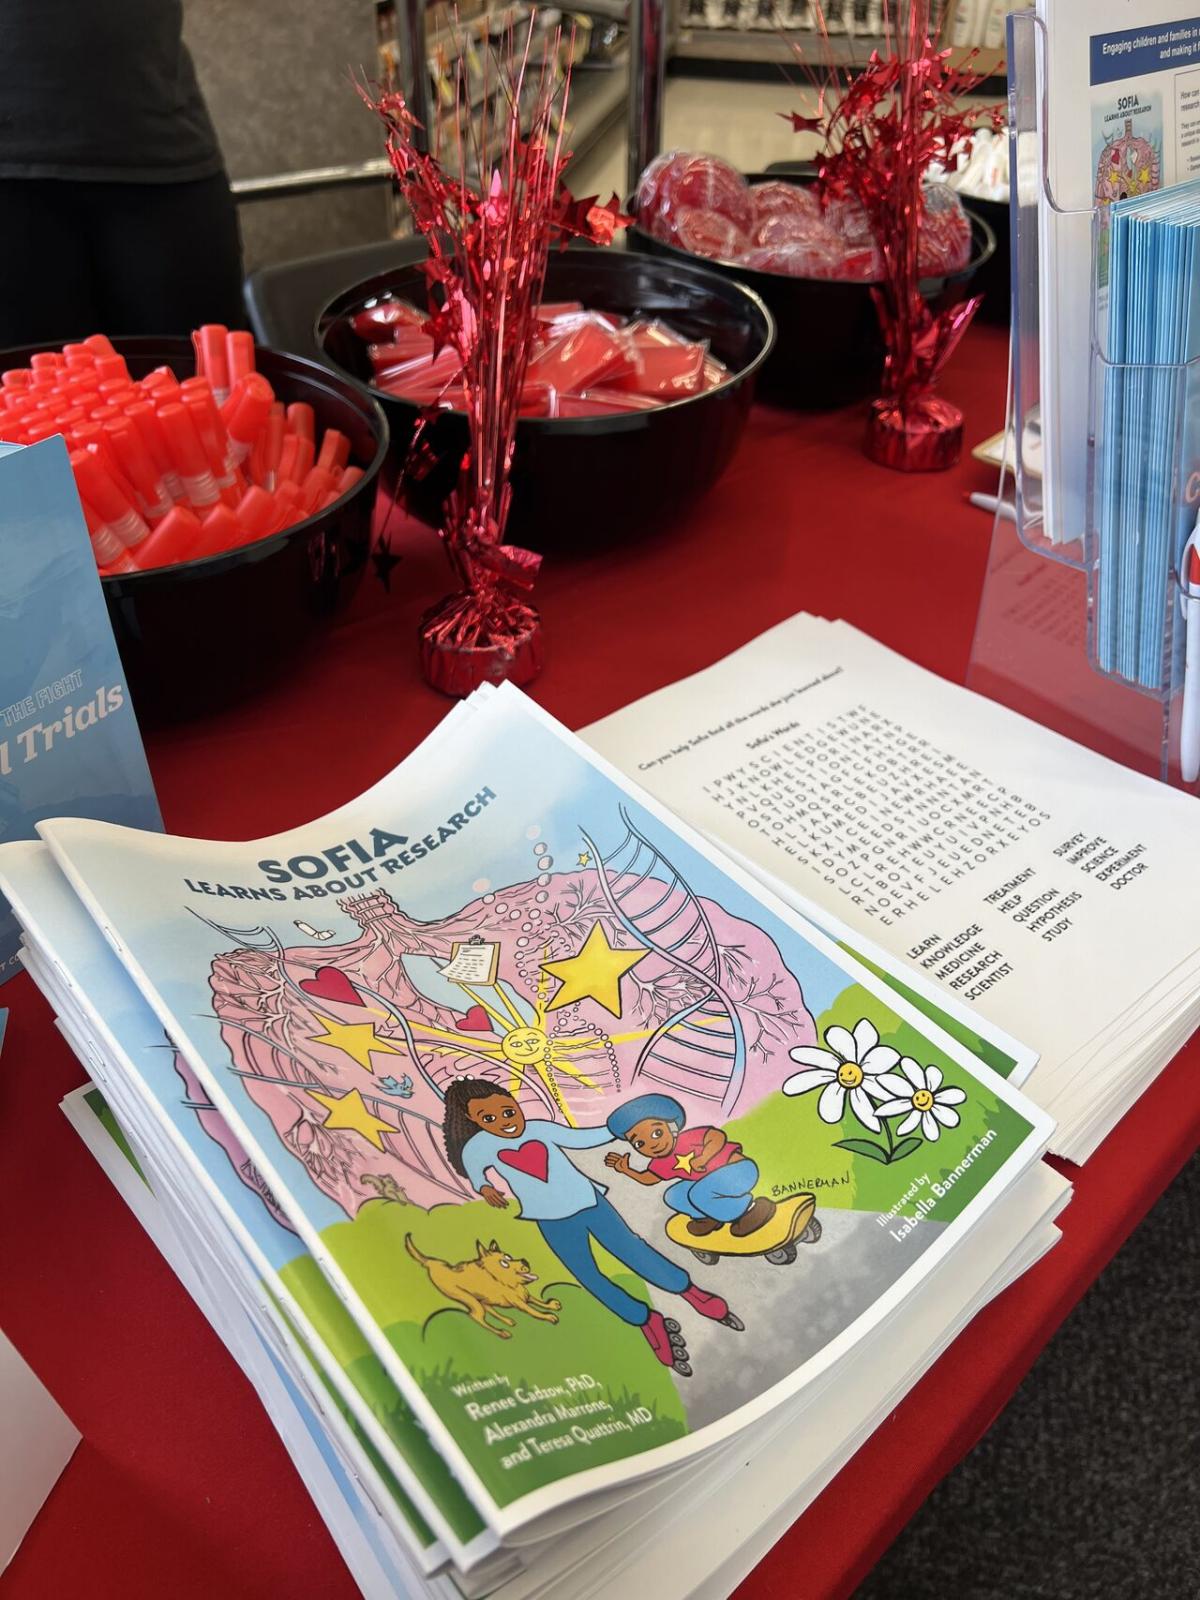 A children's book on a decorated table with treats and pamphlets.